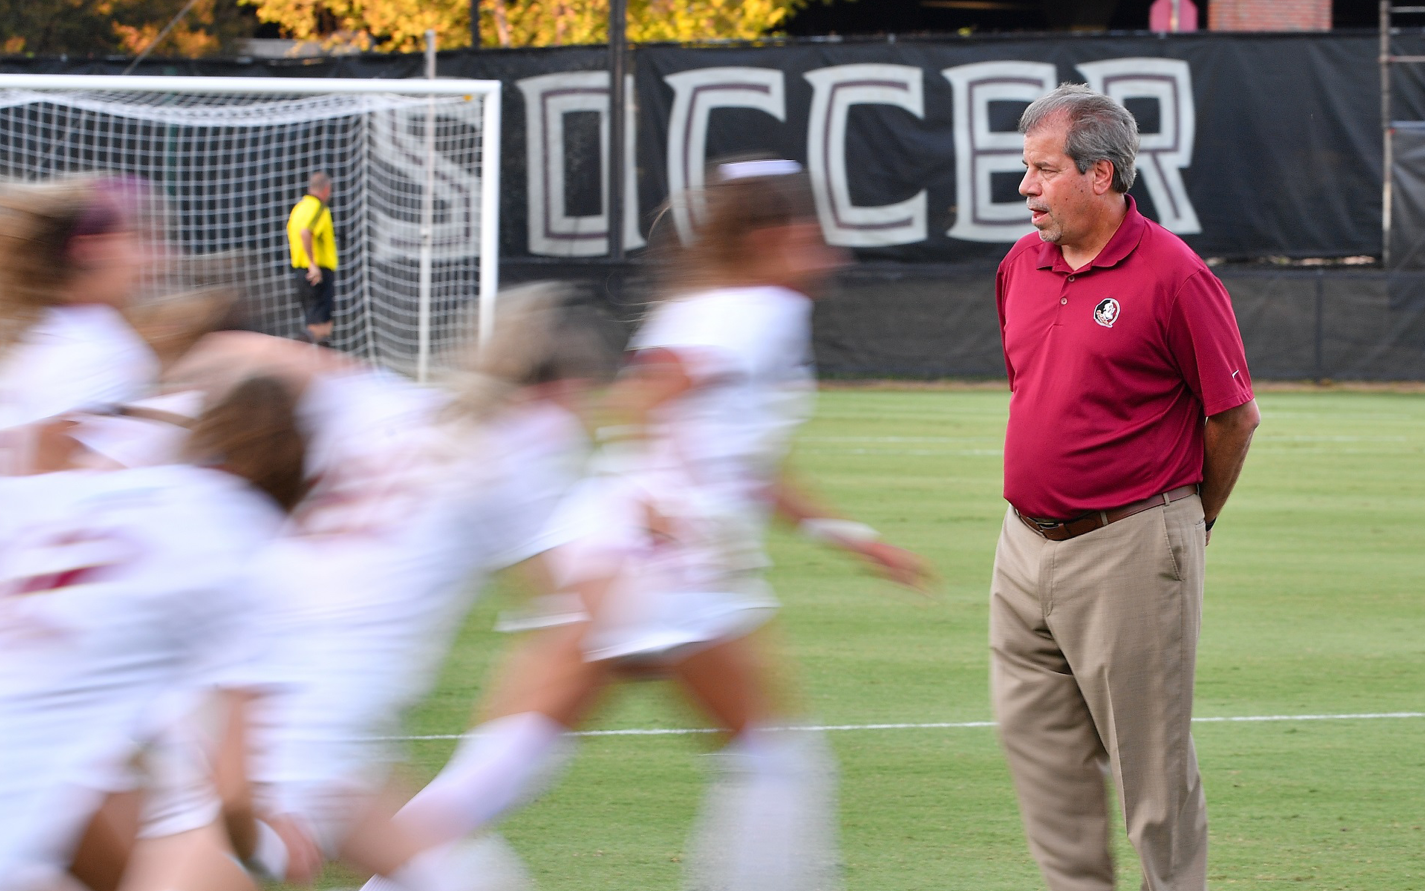 A photo of Coach Krikorian in a garnet polo, observing soccer players running on a field